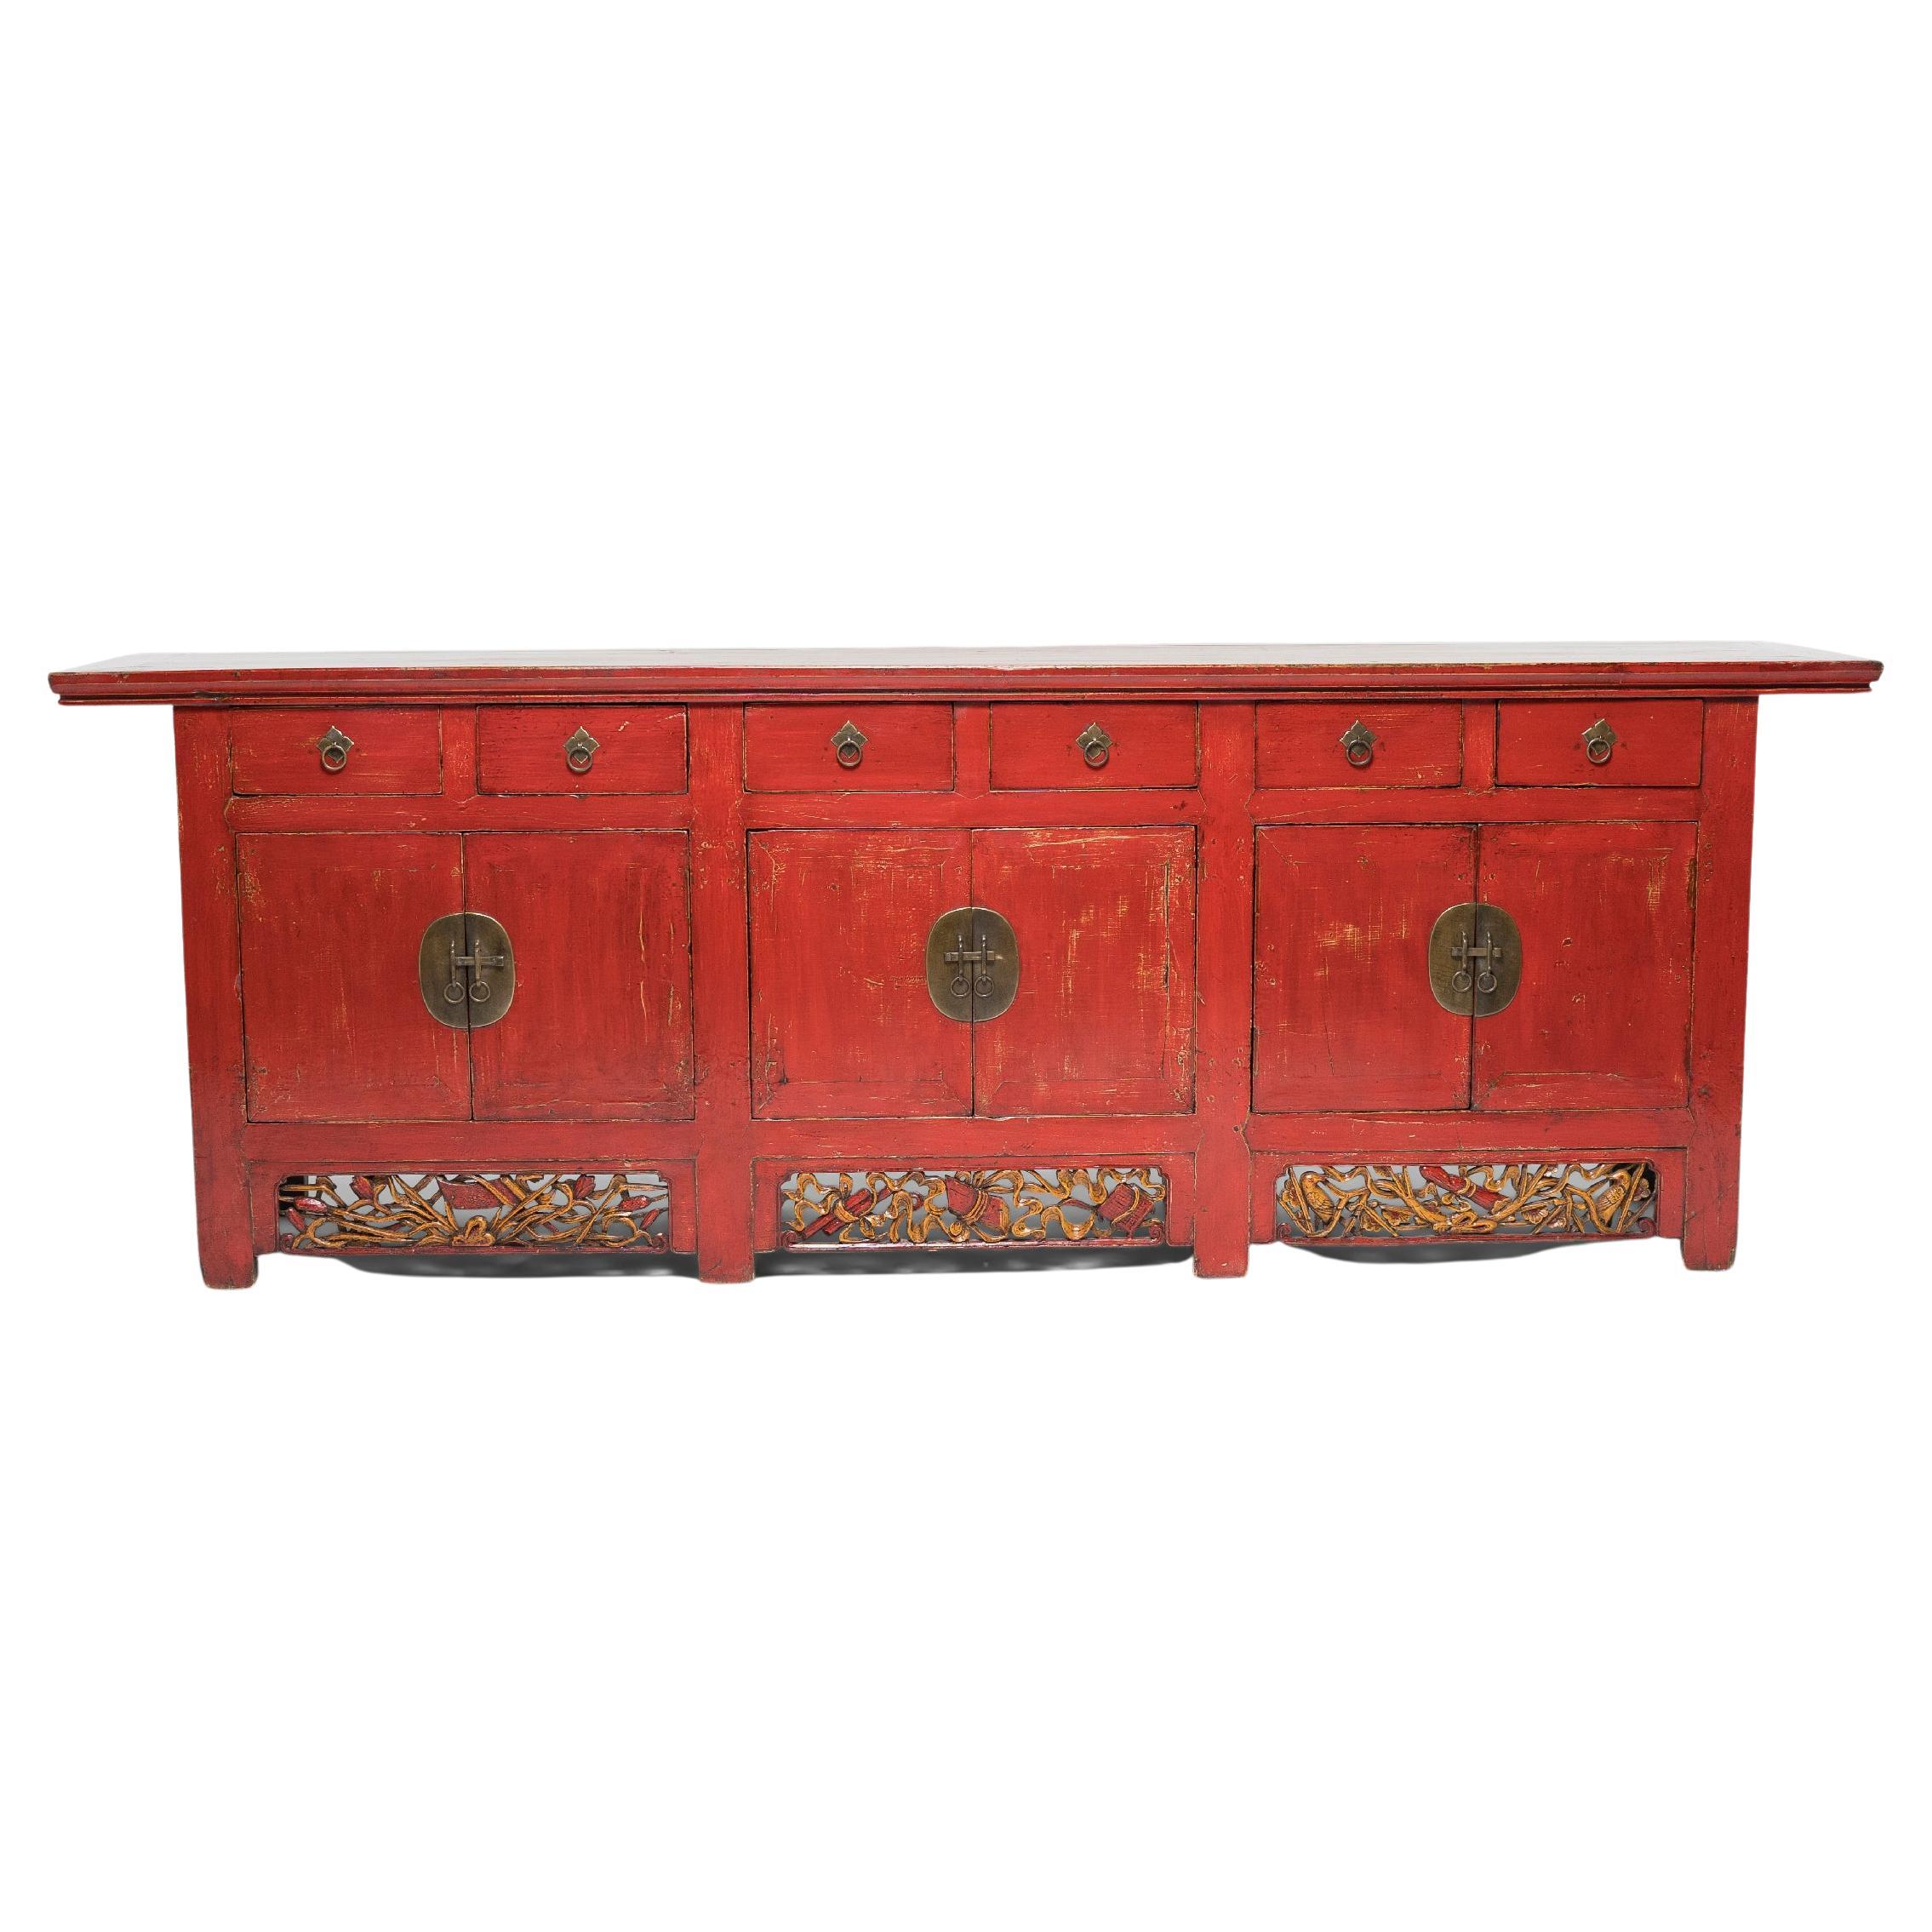 Chinese Red Lacquer Coffer with Gilt Carvings, c. 1900